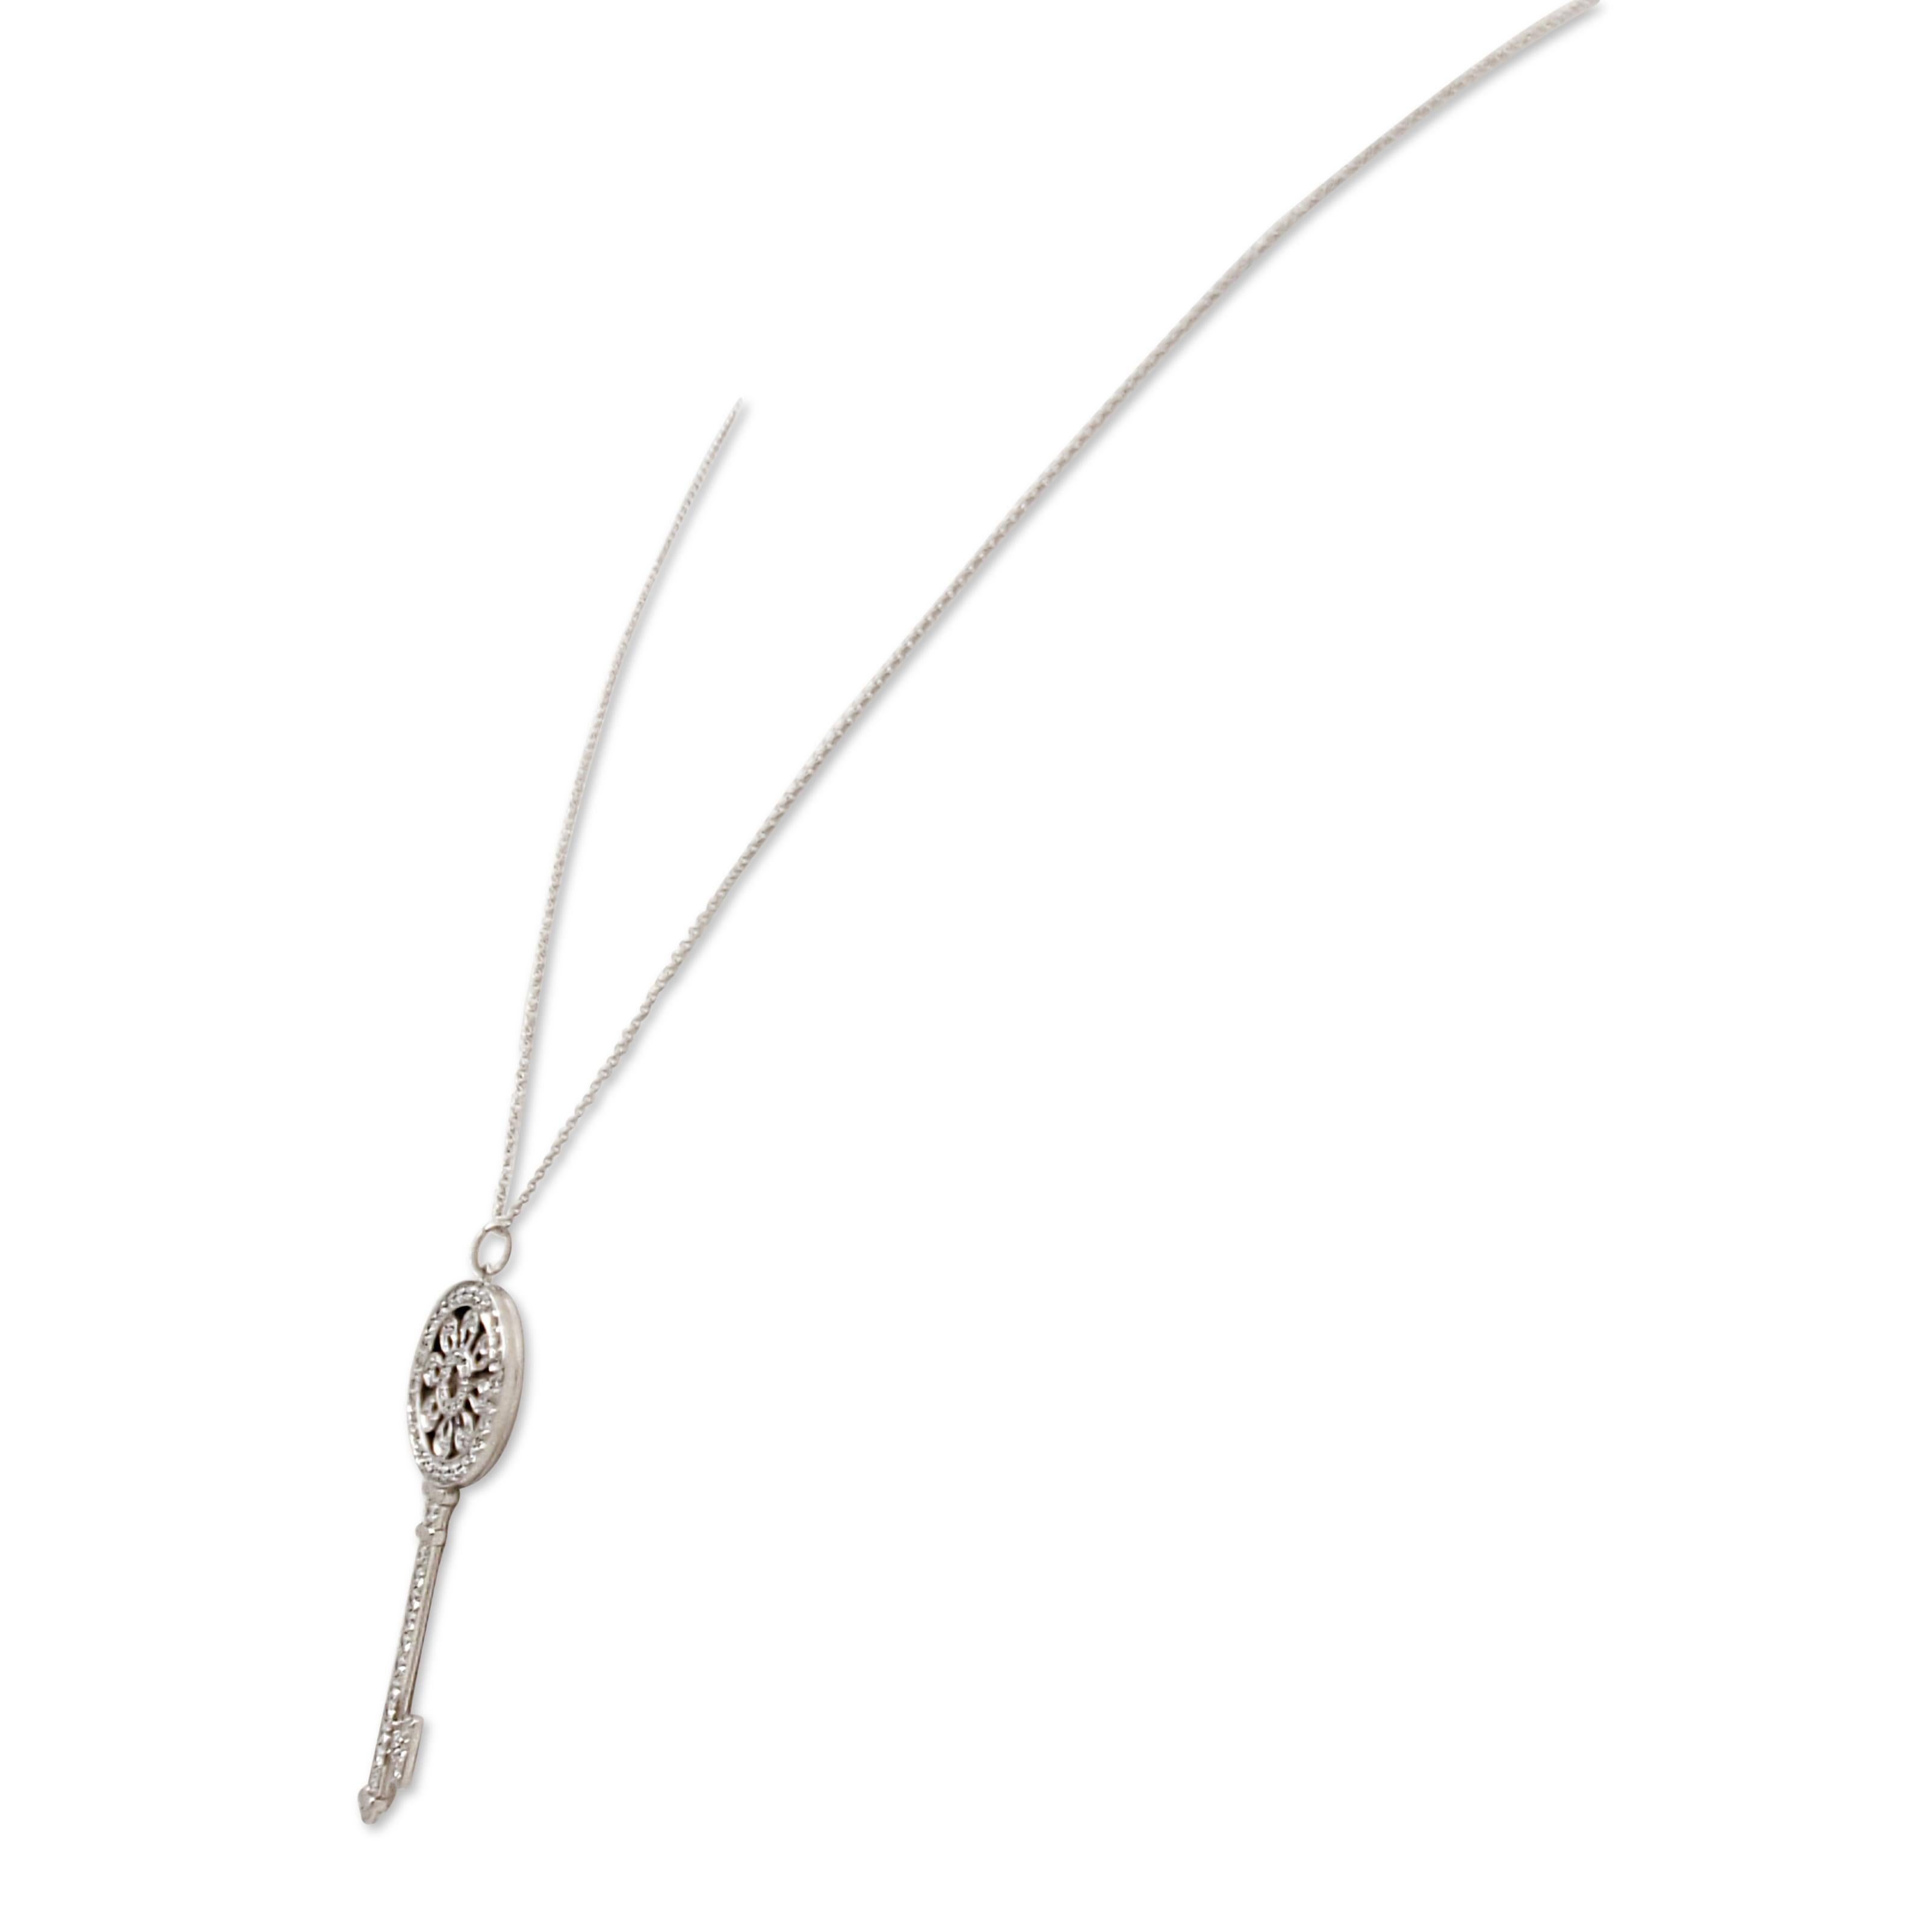 Authentic Tiffany & Co. Petal Key pendant crafted in platinum and set with approximately 1.14 carats of glittering round brilliant cut diamonds.  The pendant measures 2 1/4 inches and is situated on a delicate 20 inch chain.  Pendant and chain are